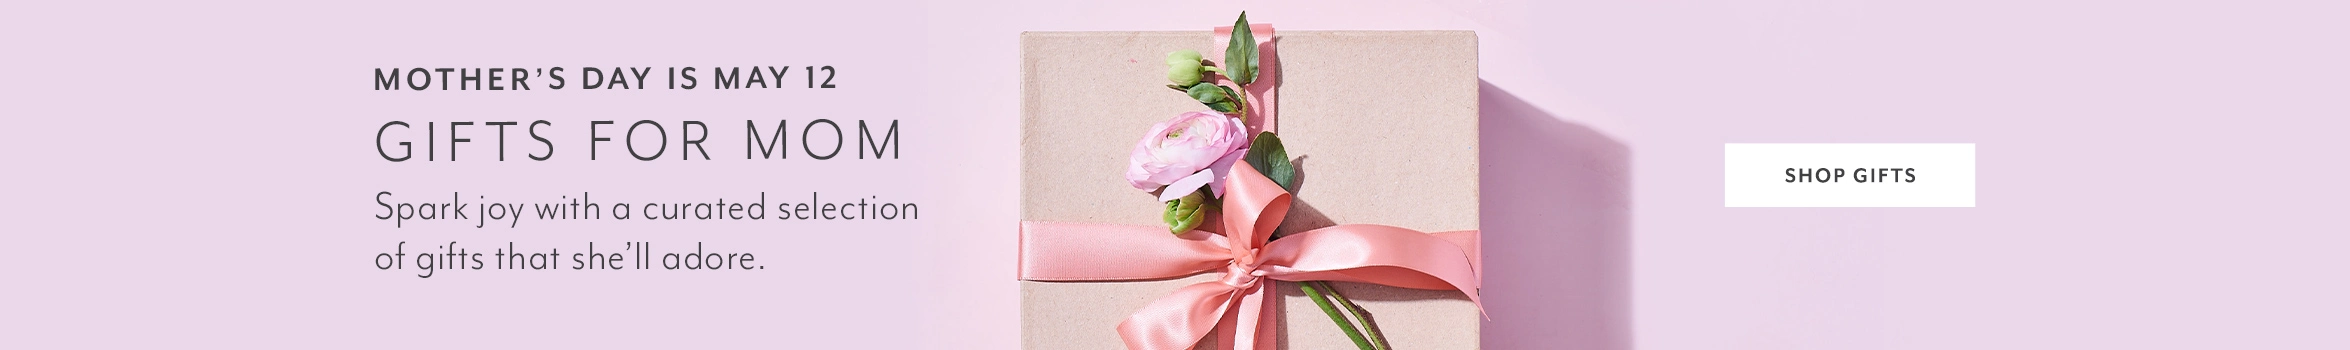 Mother's Day is May 12. Gifts for Mom. Spark joy with a curated collection of gifts that she'll adore.